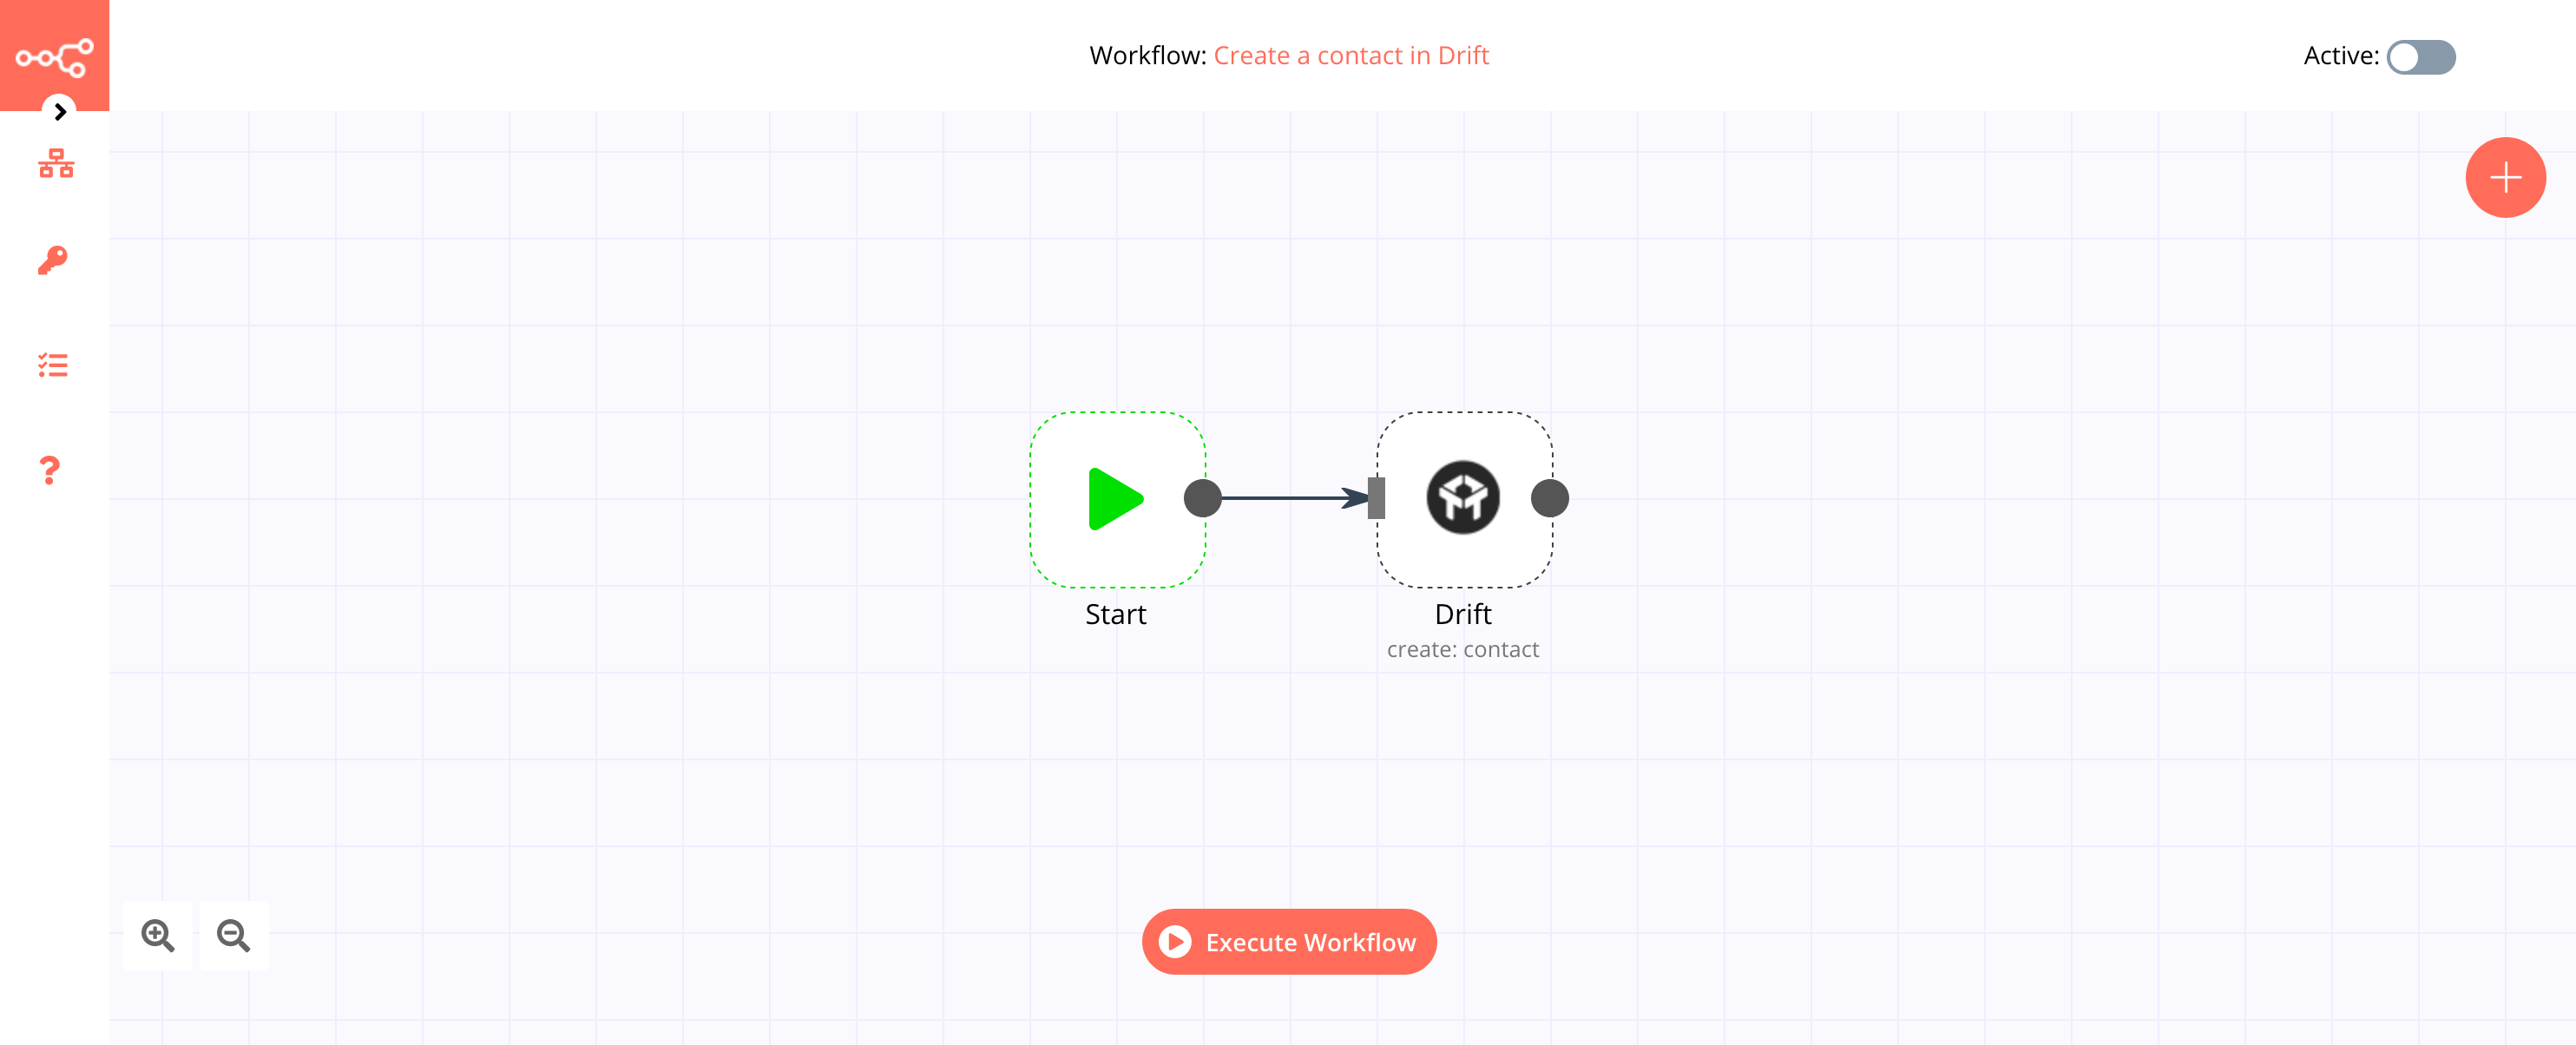 A workflow with the Drift node